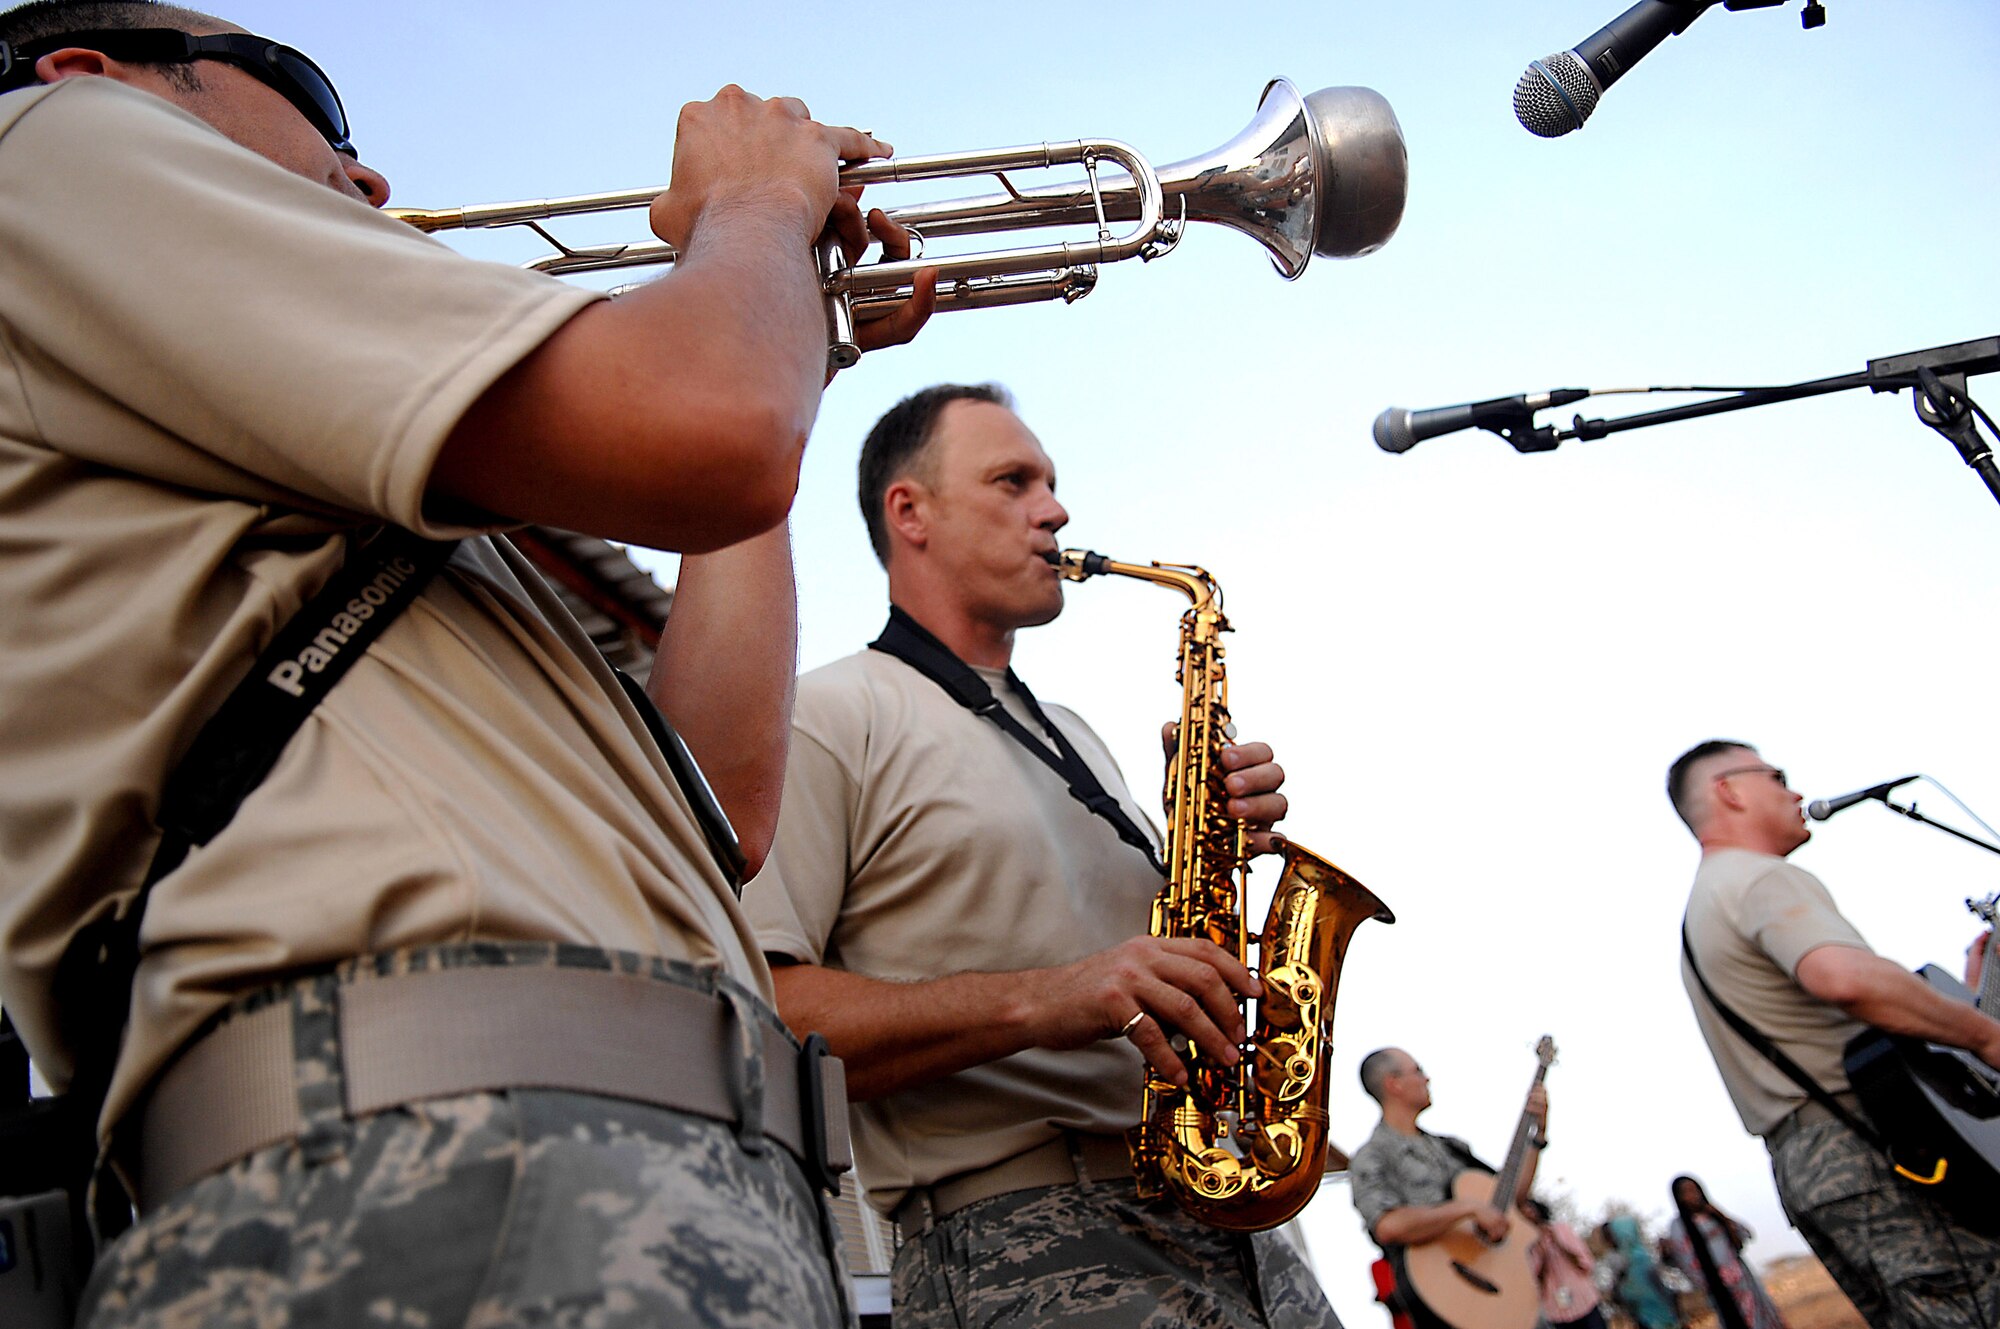 The U.S. Air Force Central Command band, Falcon, performs a concert for villagers May 22 in Negad, Djibouti. The band is deployed in support of Combined Joint Task Force - Horn of Africa out of Camp Lemonier, Djibouti. (U.S. Air Force photo/Tech. Sgt. Jeremy T. Lock)